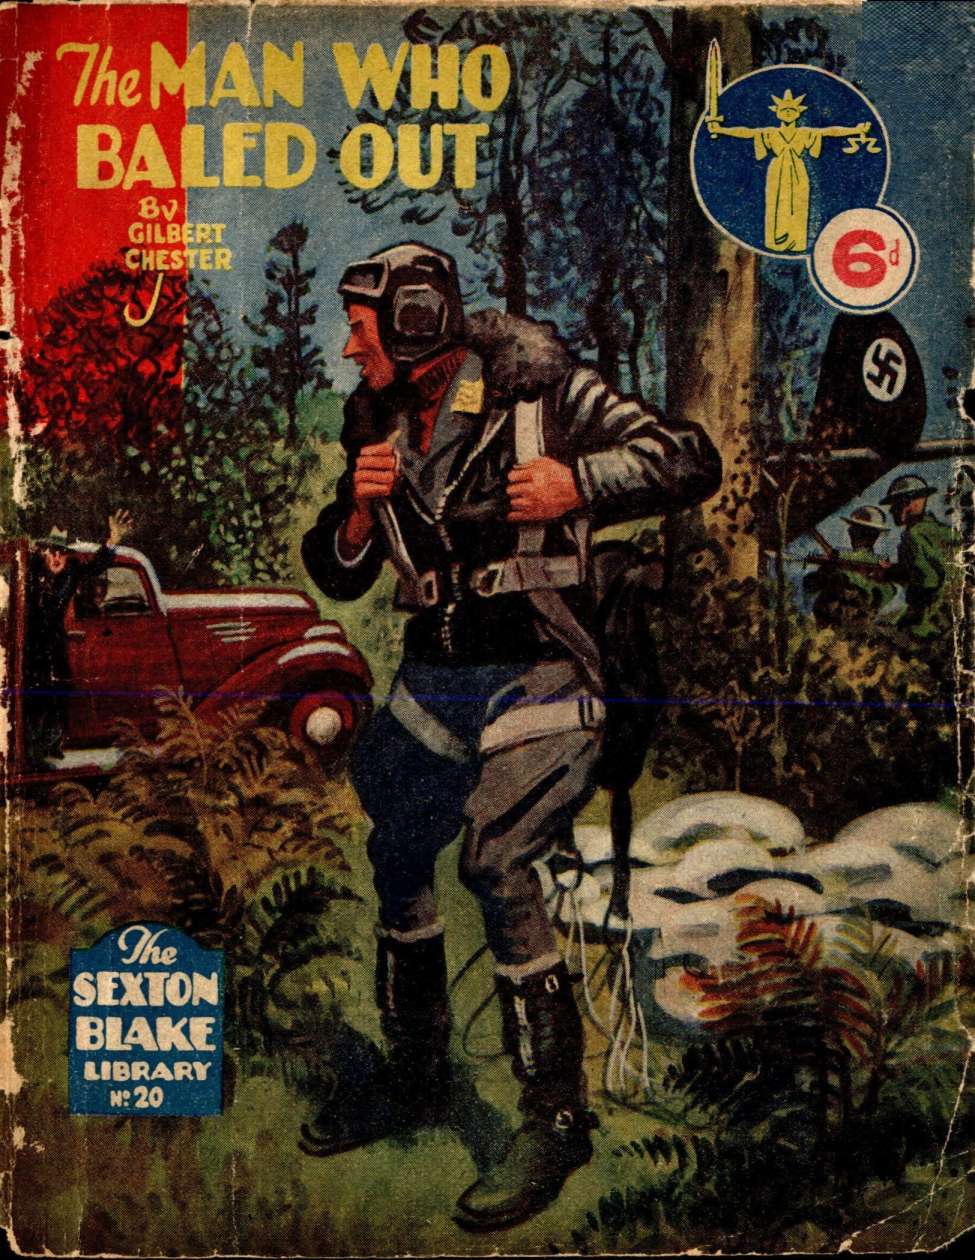 Book Cover For Sexton Blake Library S3 20 - The Man Who Baled Out